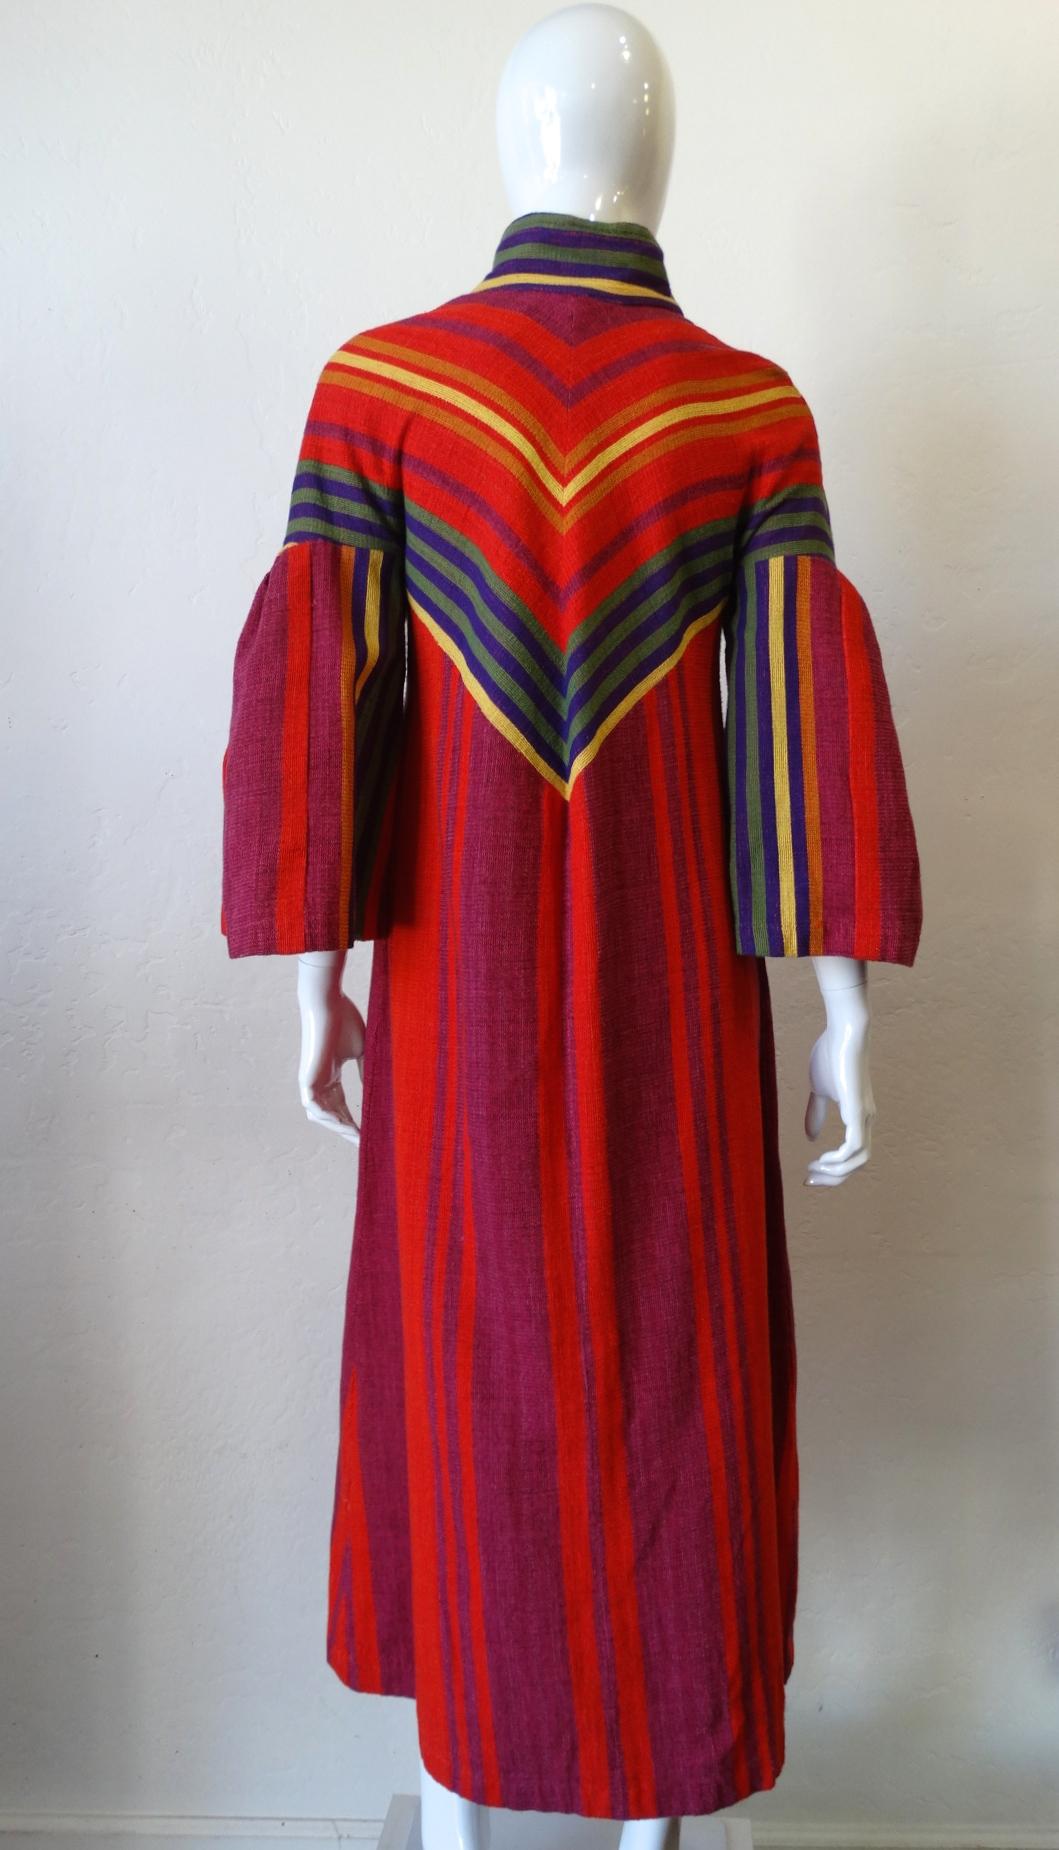 The Perfect Rikma Is Waiting For You! Circa 1970s, this Rikma features a colorful rainbow asymmetrical striped motif and a zipper front with a slit. Flounce sleeves and a classic shirt style collar which can be stood up for a mandarin style collar.